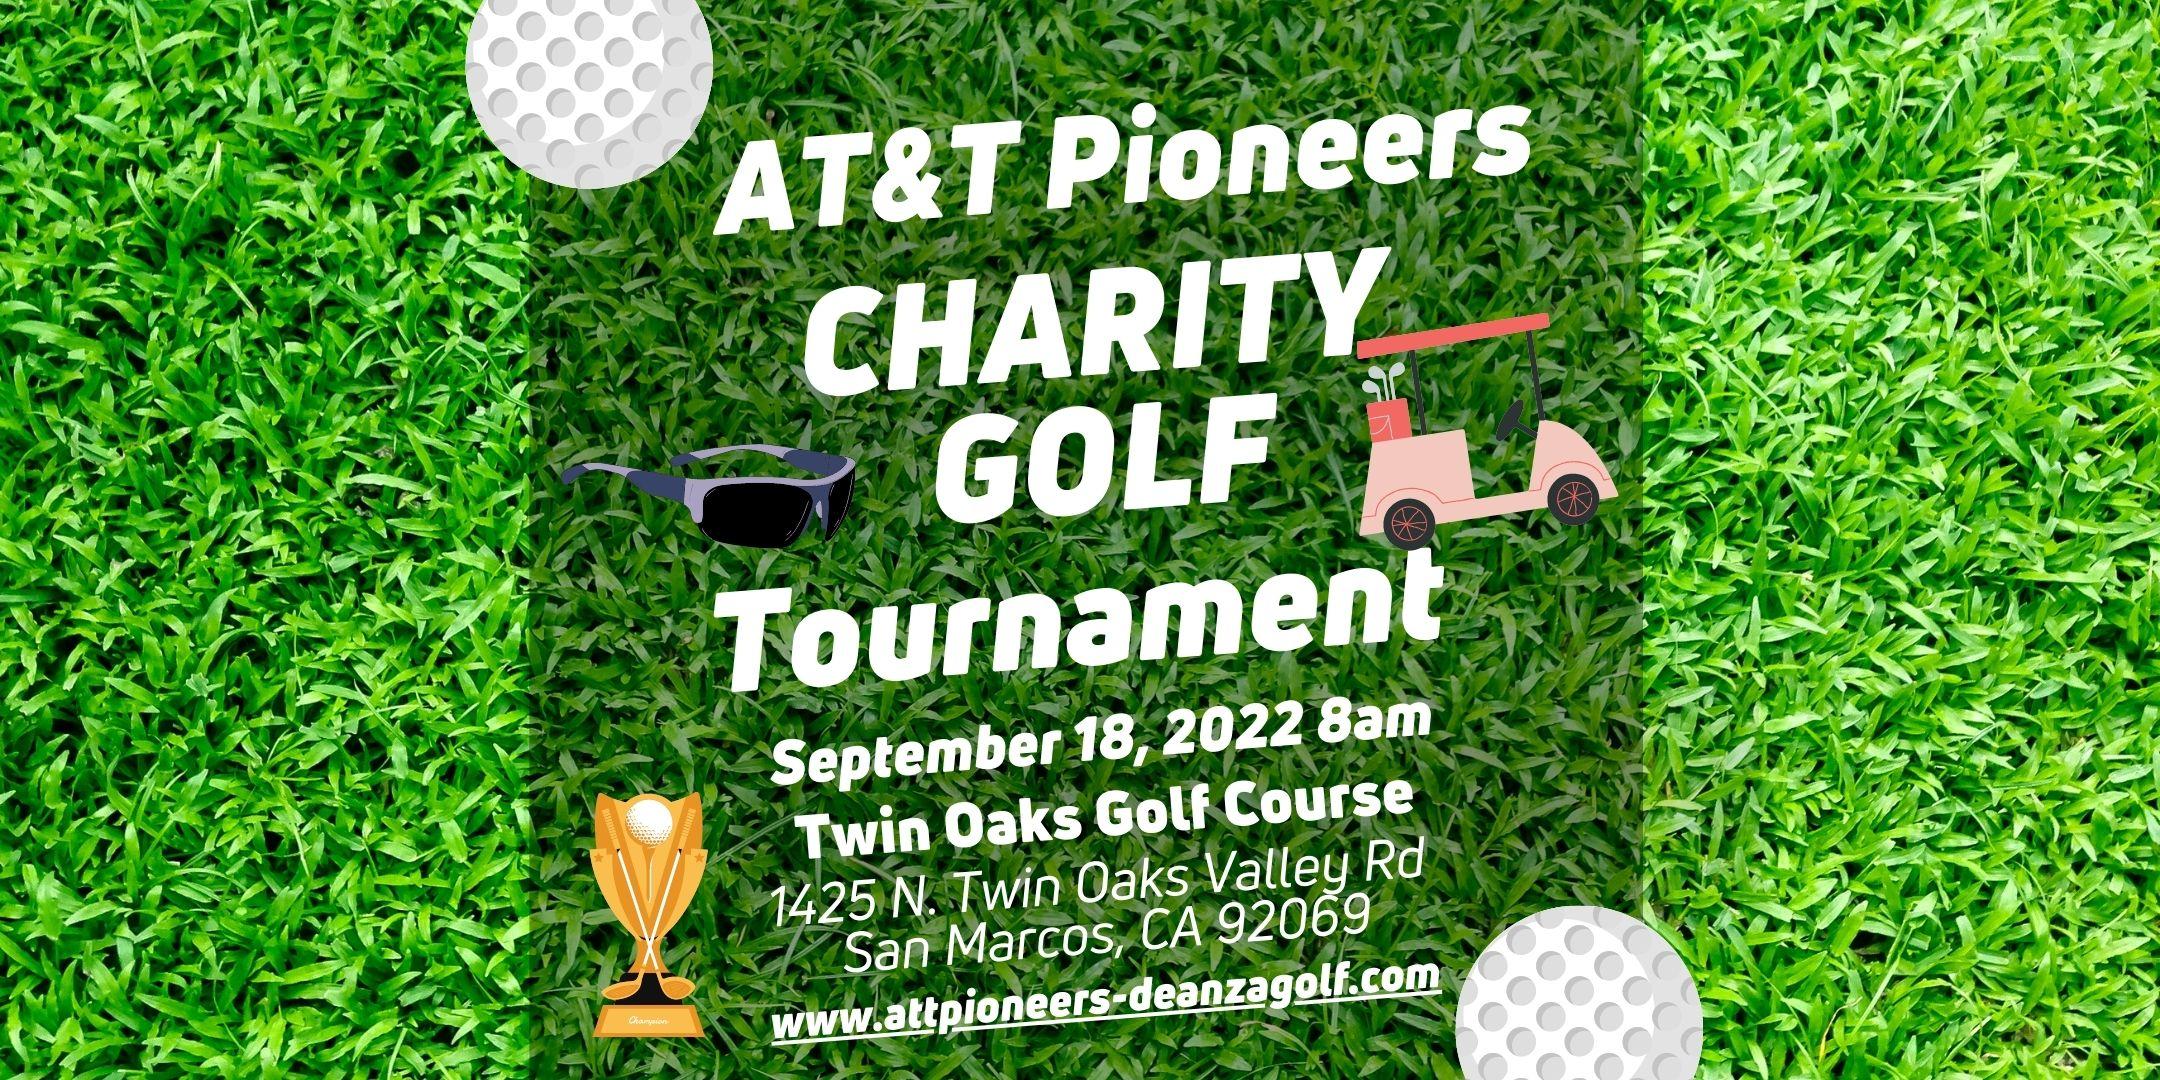 AT&T Pioneers Charity Golf Tournament